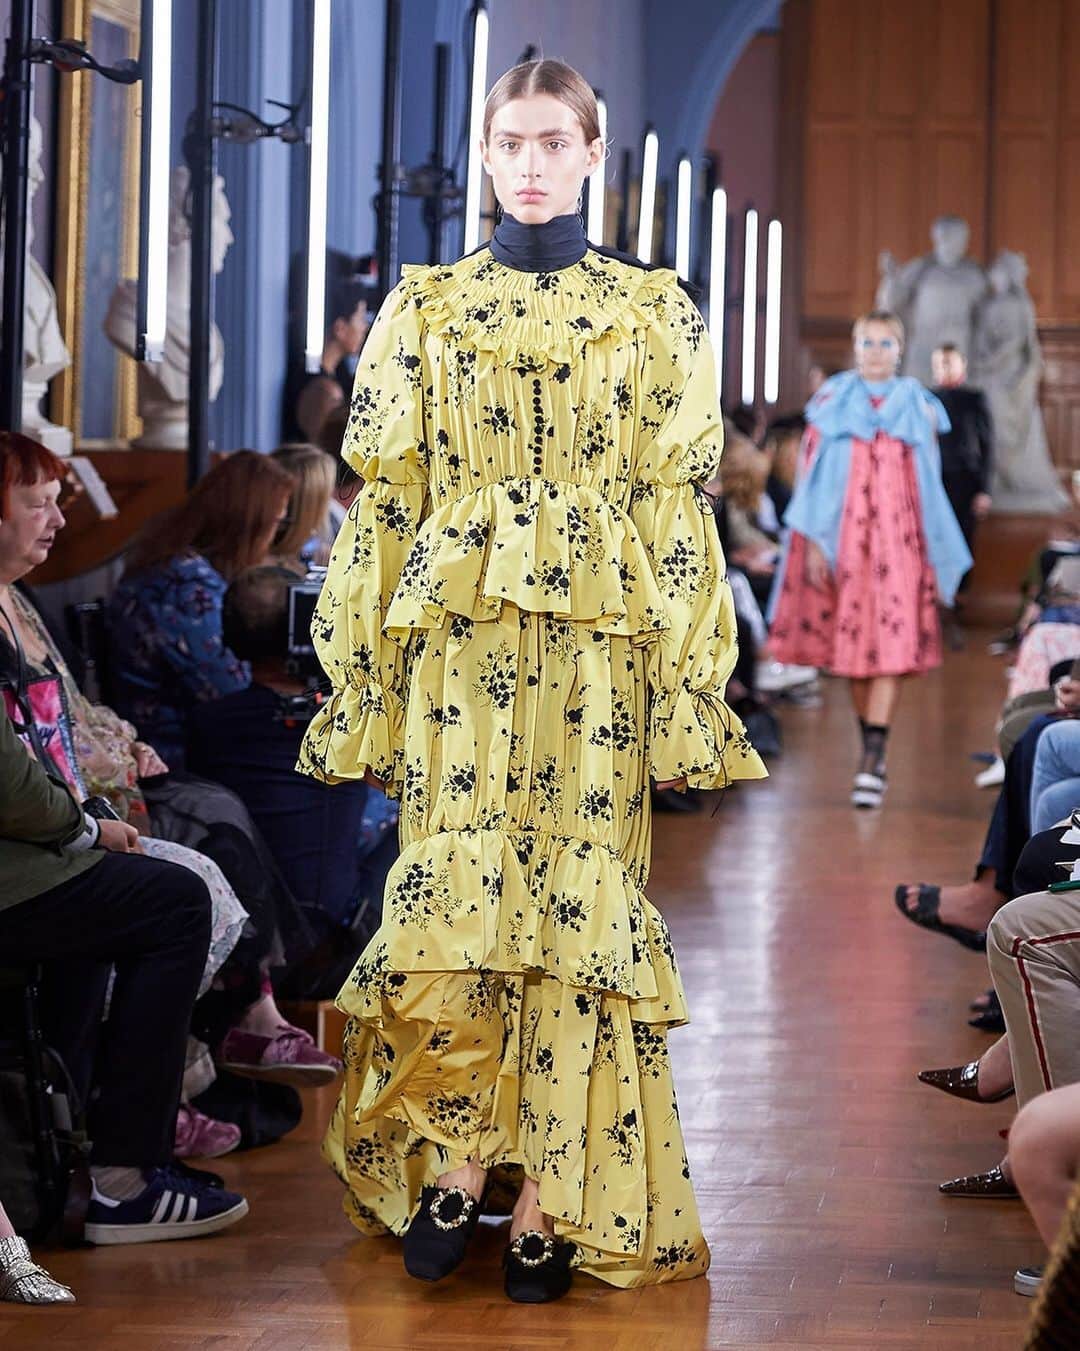 Fashion Weekのインスタグラム：「Erdem debuted a ballet-inspired collection at #LFW, complete with the signature motifs and romantic silhouettes of the label. Visit @erdem to see all the latest looks. ⁠⁠ ⁠⁠ Shown here, Erdem's September 2018 #LFW runway. Photo by @gettyimages」